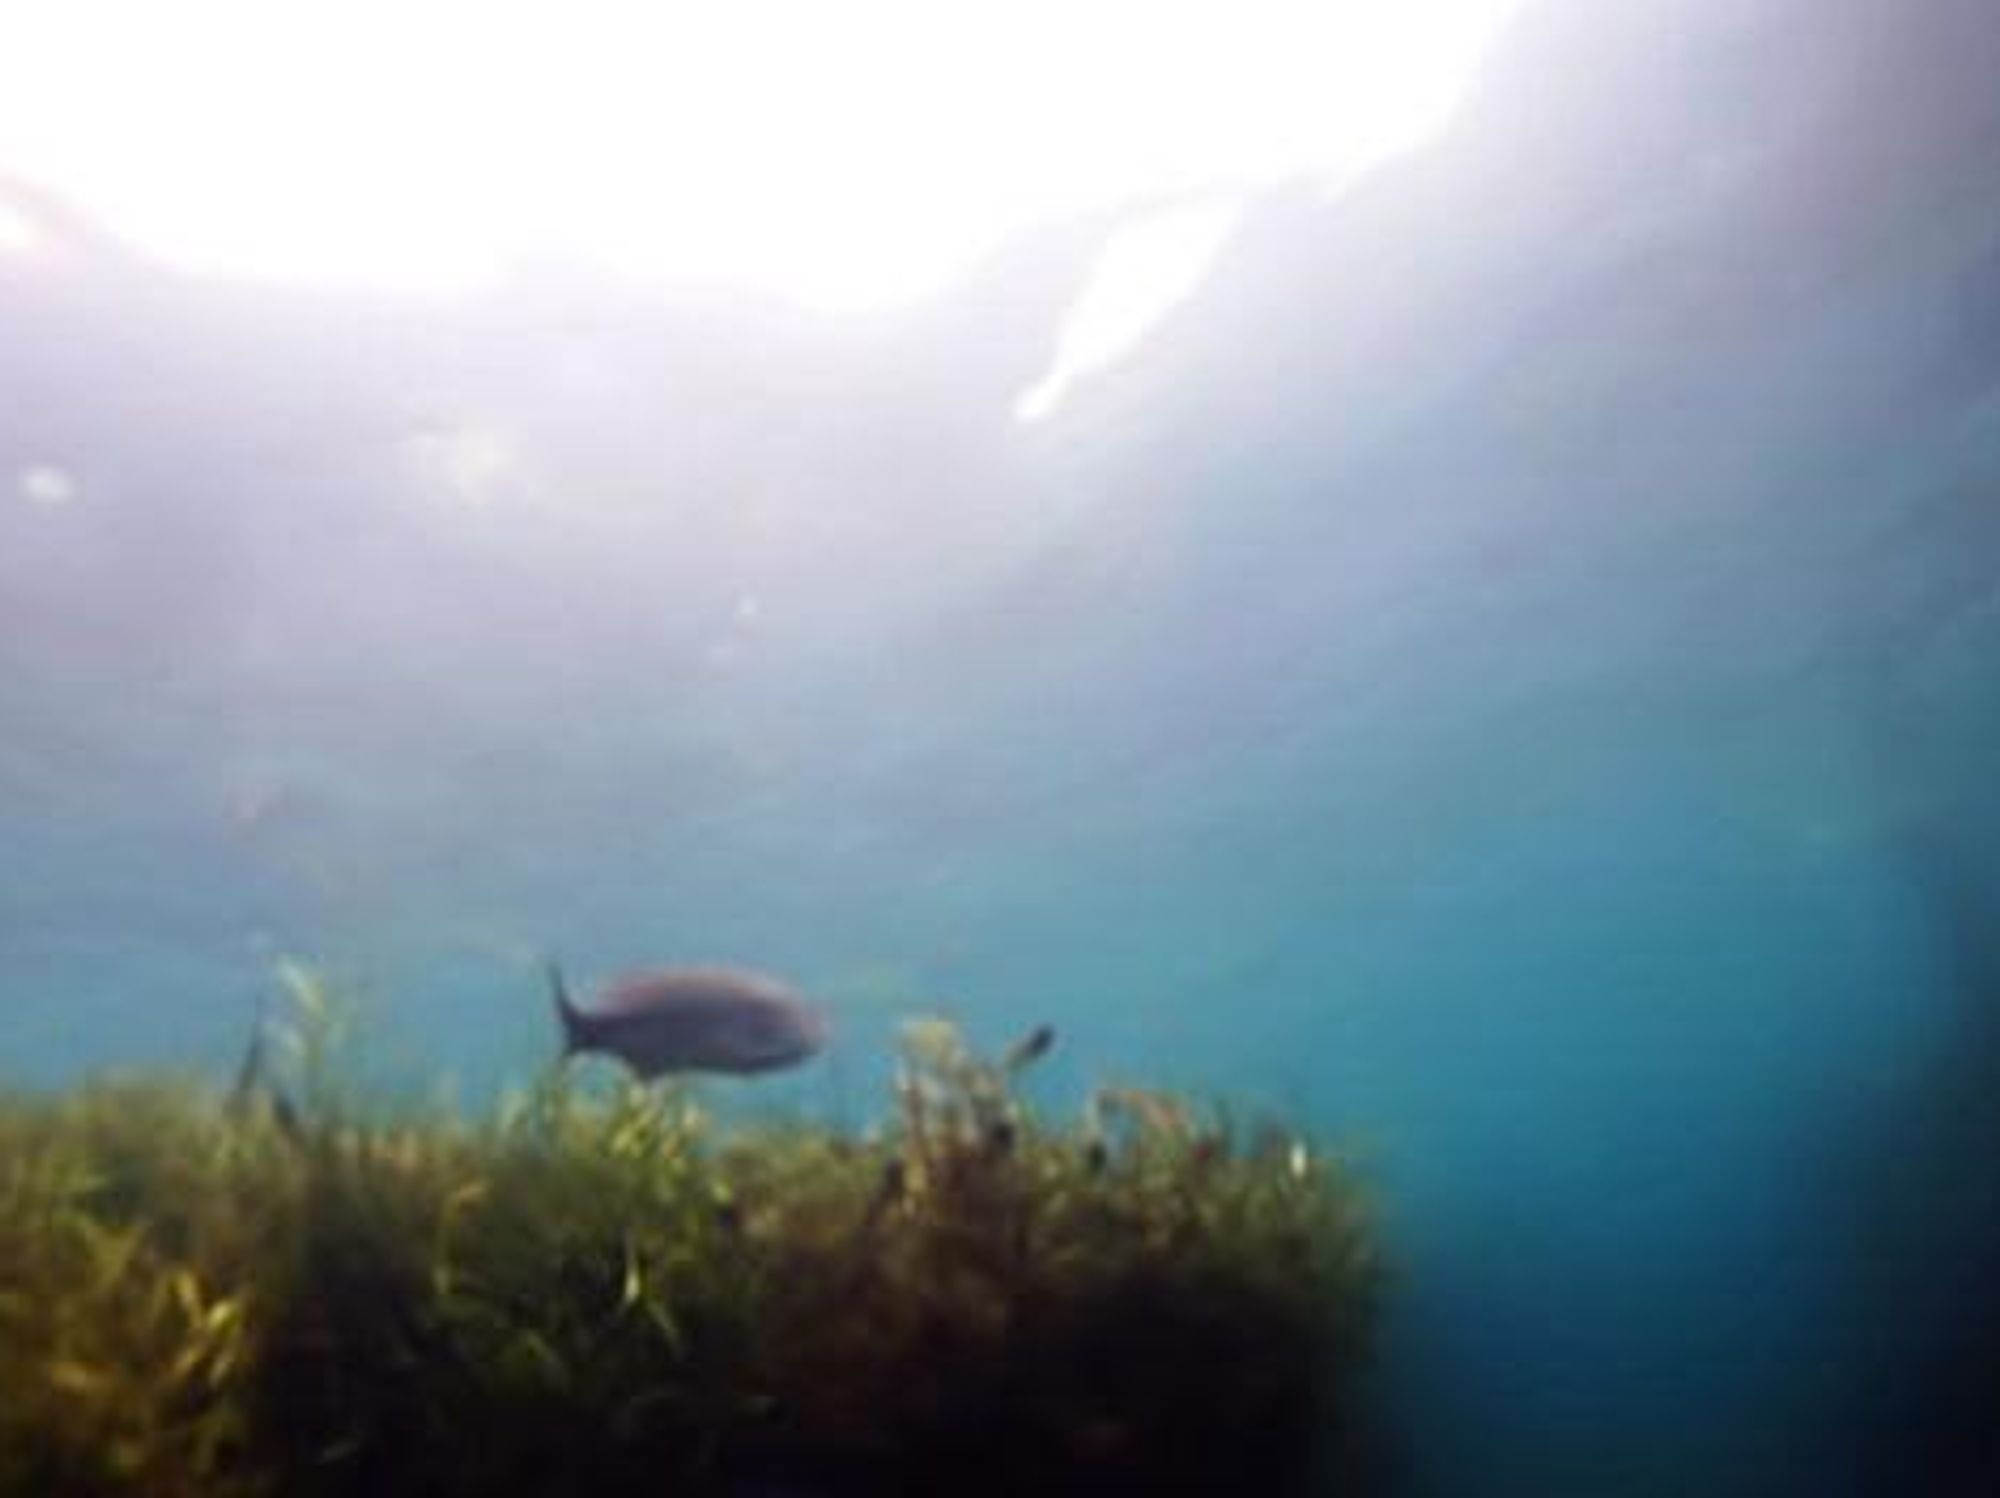 Underwater view of Barton Springs courtesy of Submerged